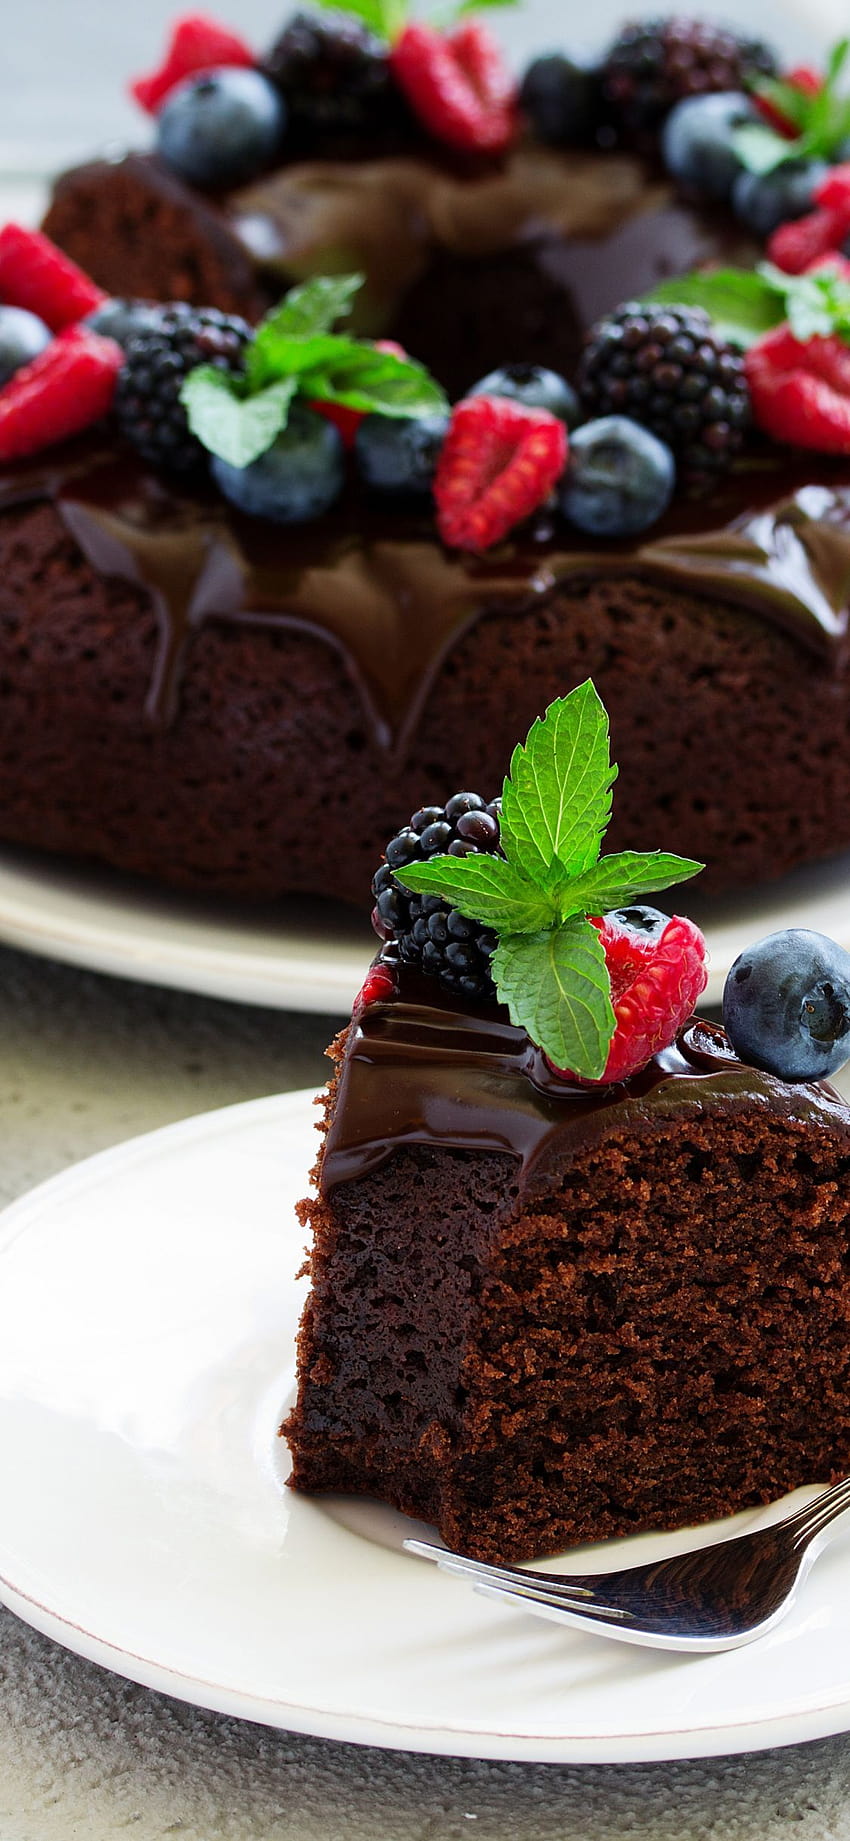 Rich Chocolate Cake with a Cherry on Top